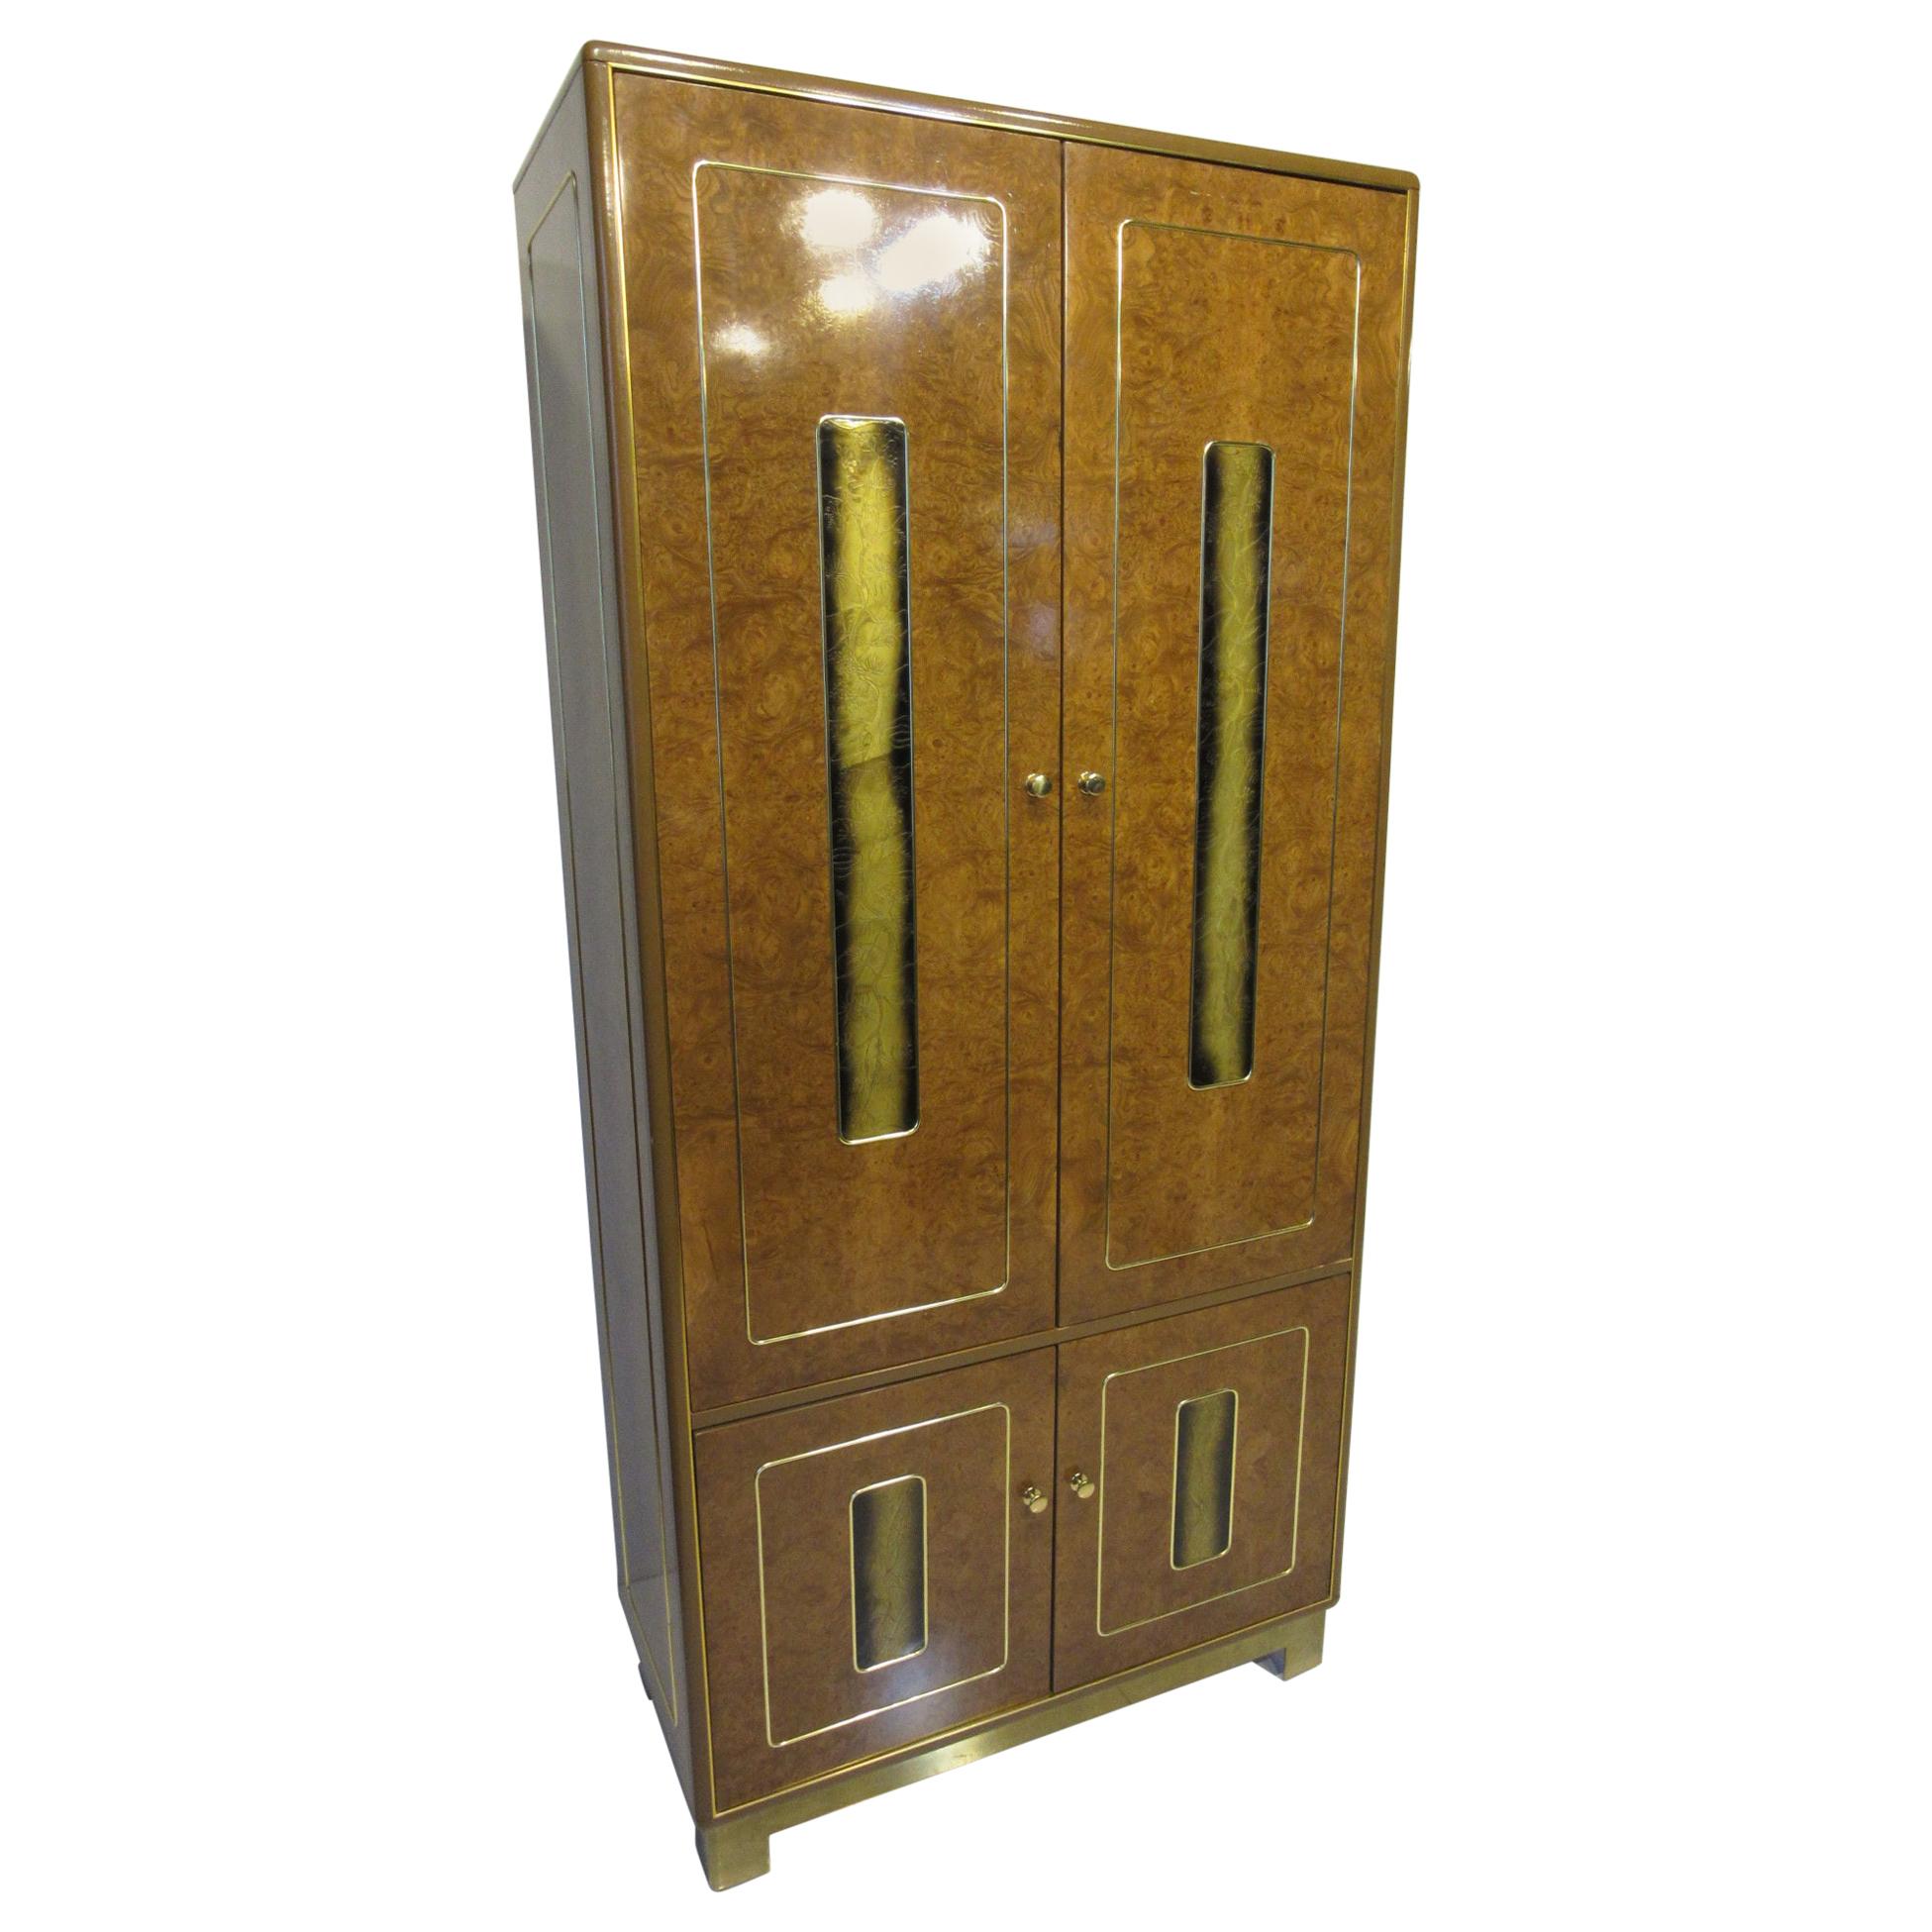 Burl / Brass Tall Chest or Armoire with Acid Etched Panels by Romweber